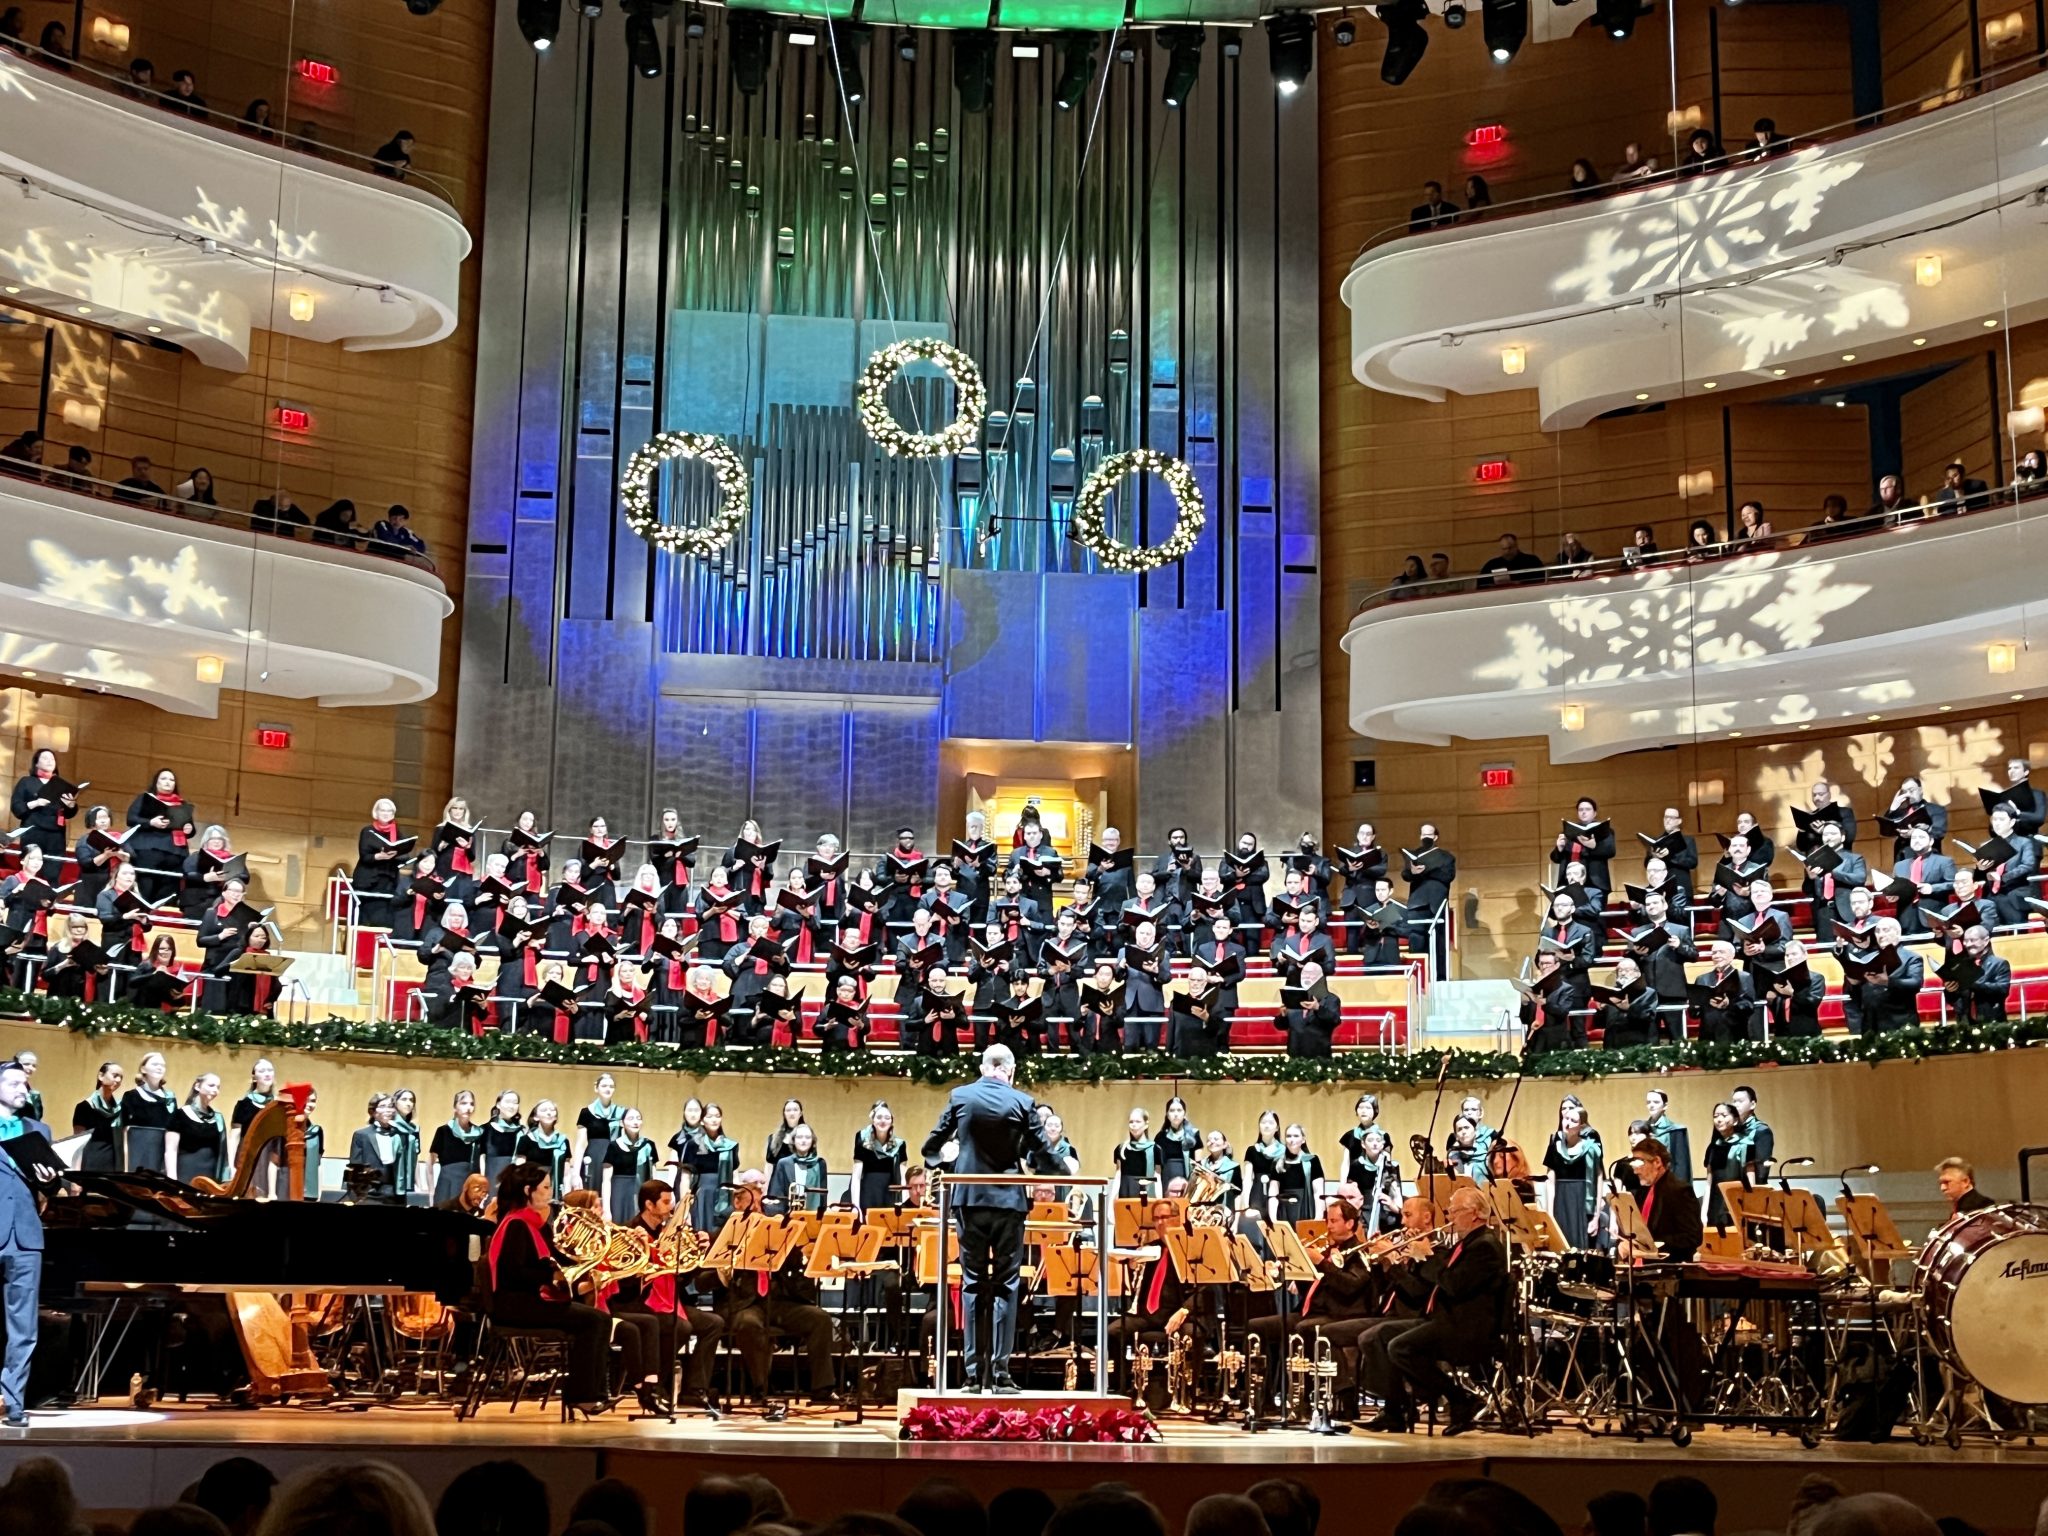 Things to do this holiday season - 'Tis the Season' Pacific Chorale Concert at Segerstrom Concert Hall